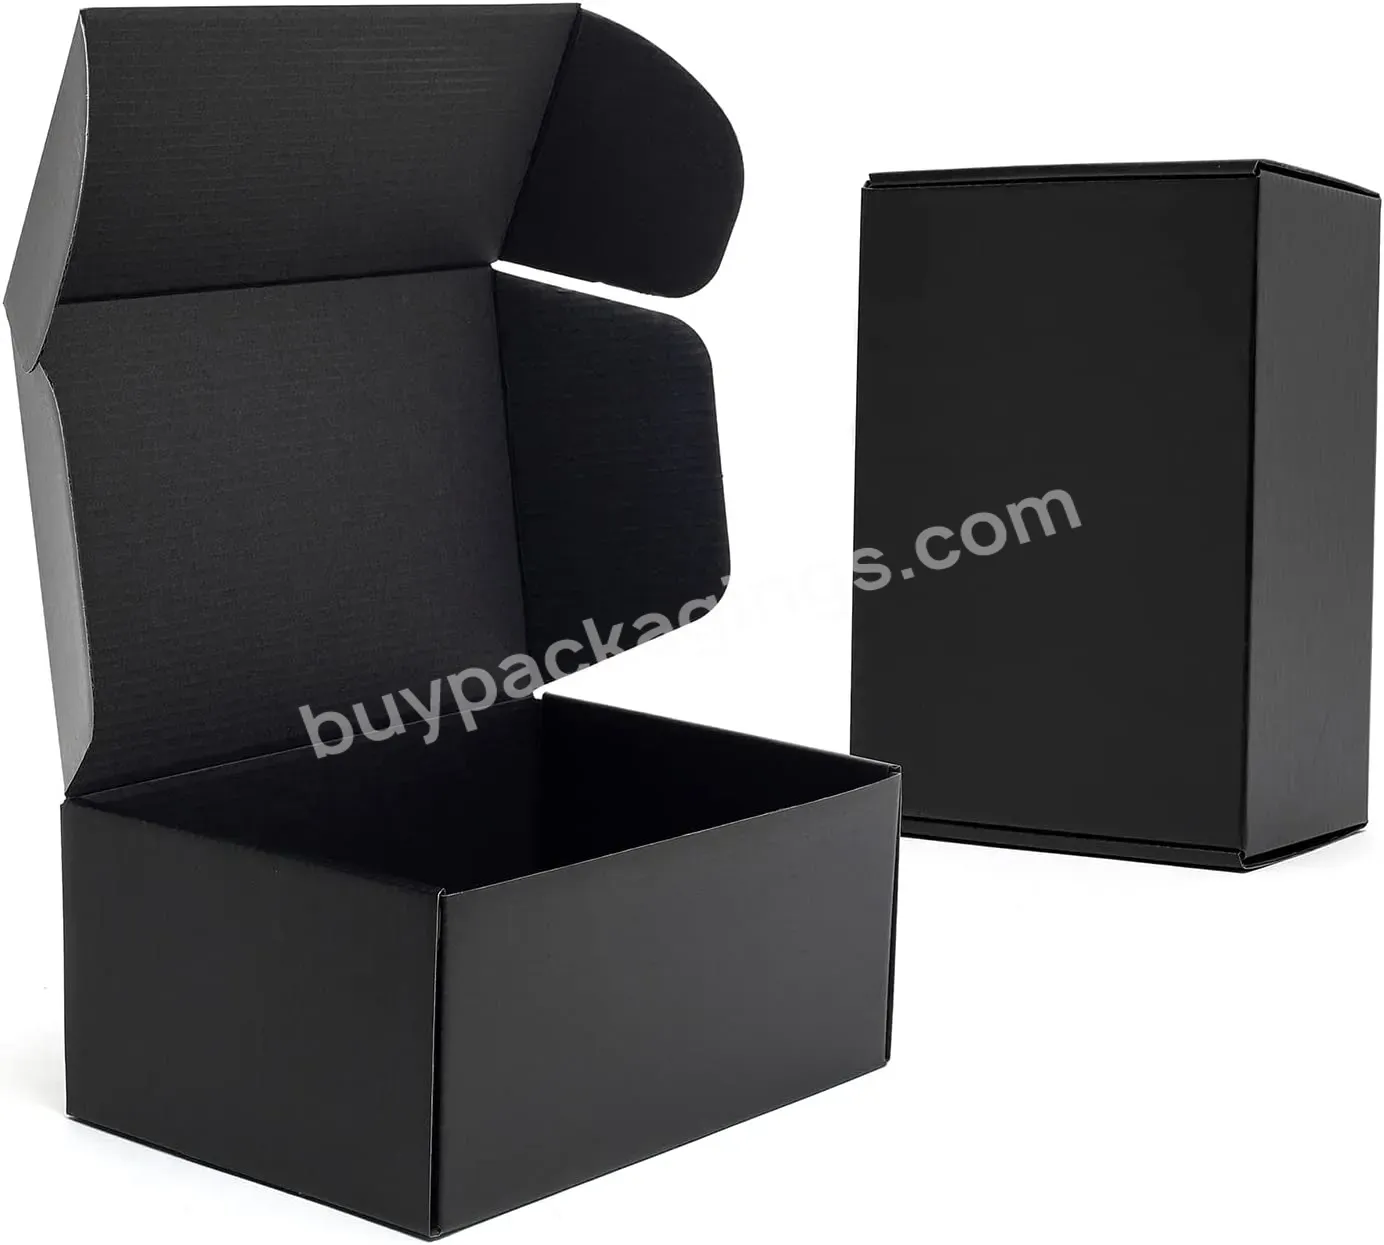 12x9x4" Black Shipping Corrugated Cardboard Mailing Box Literature Mailer Packaging Gifts Craft Boxes - Buy Shipper Corrugated Box,Boxes For Gift Sets,Boxes For Gift Sets.